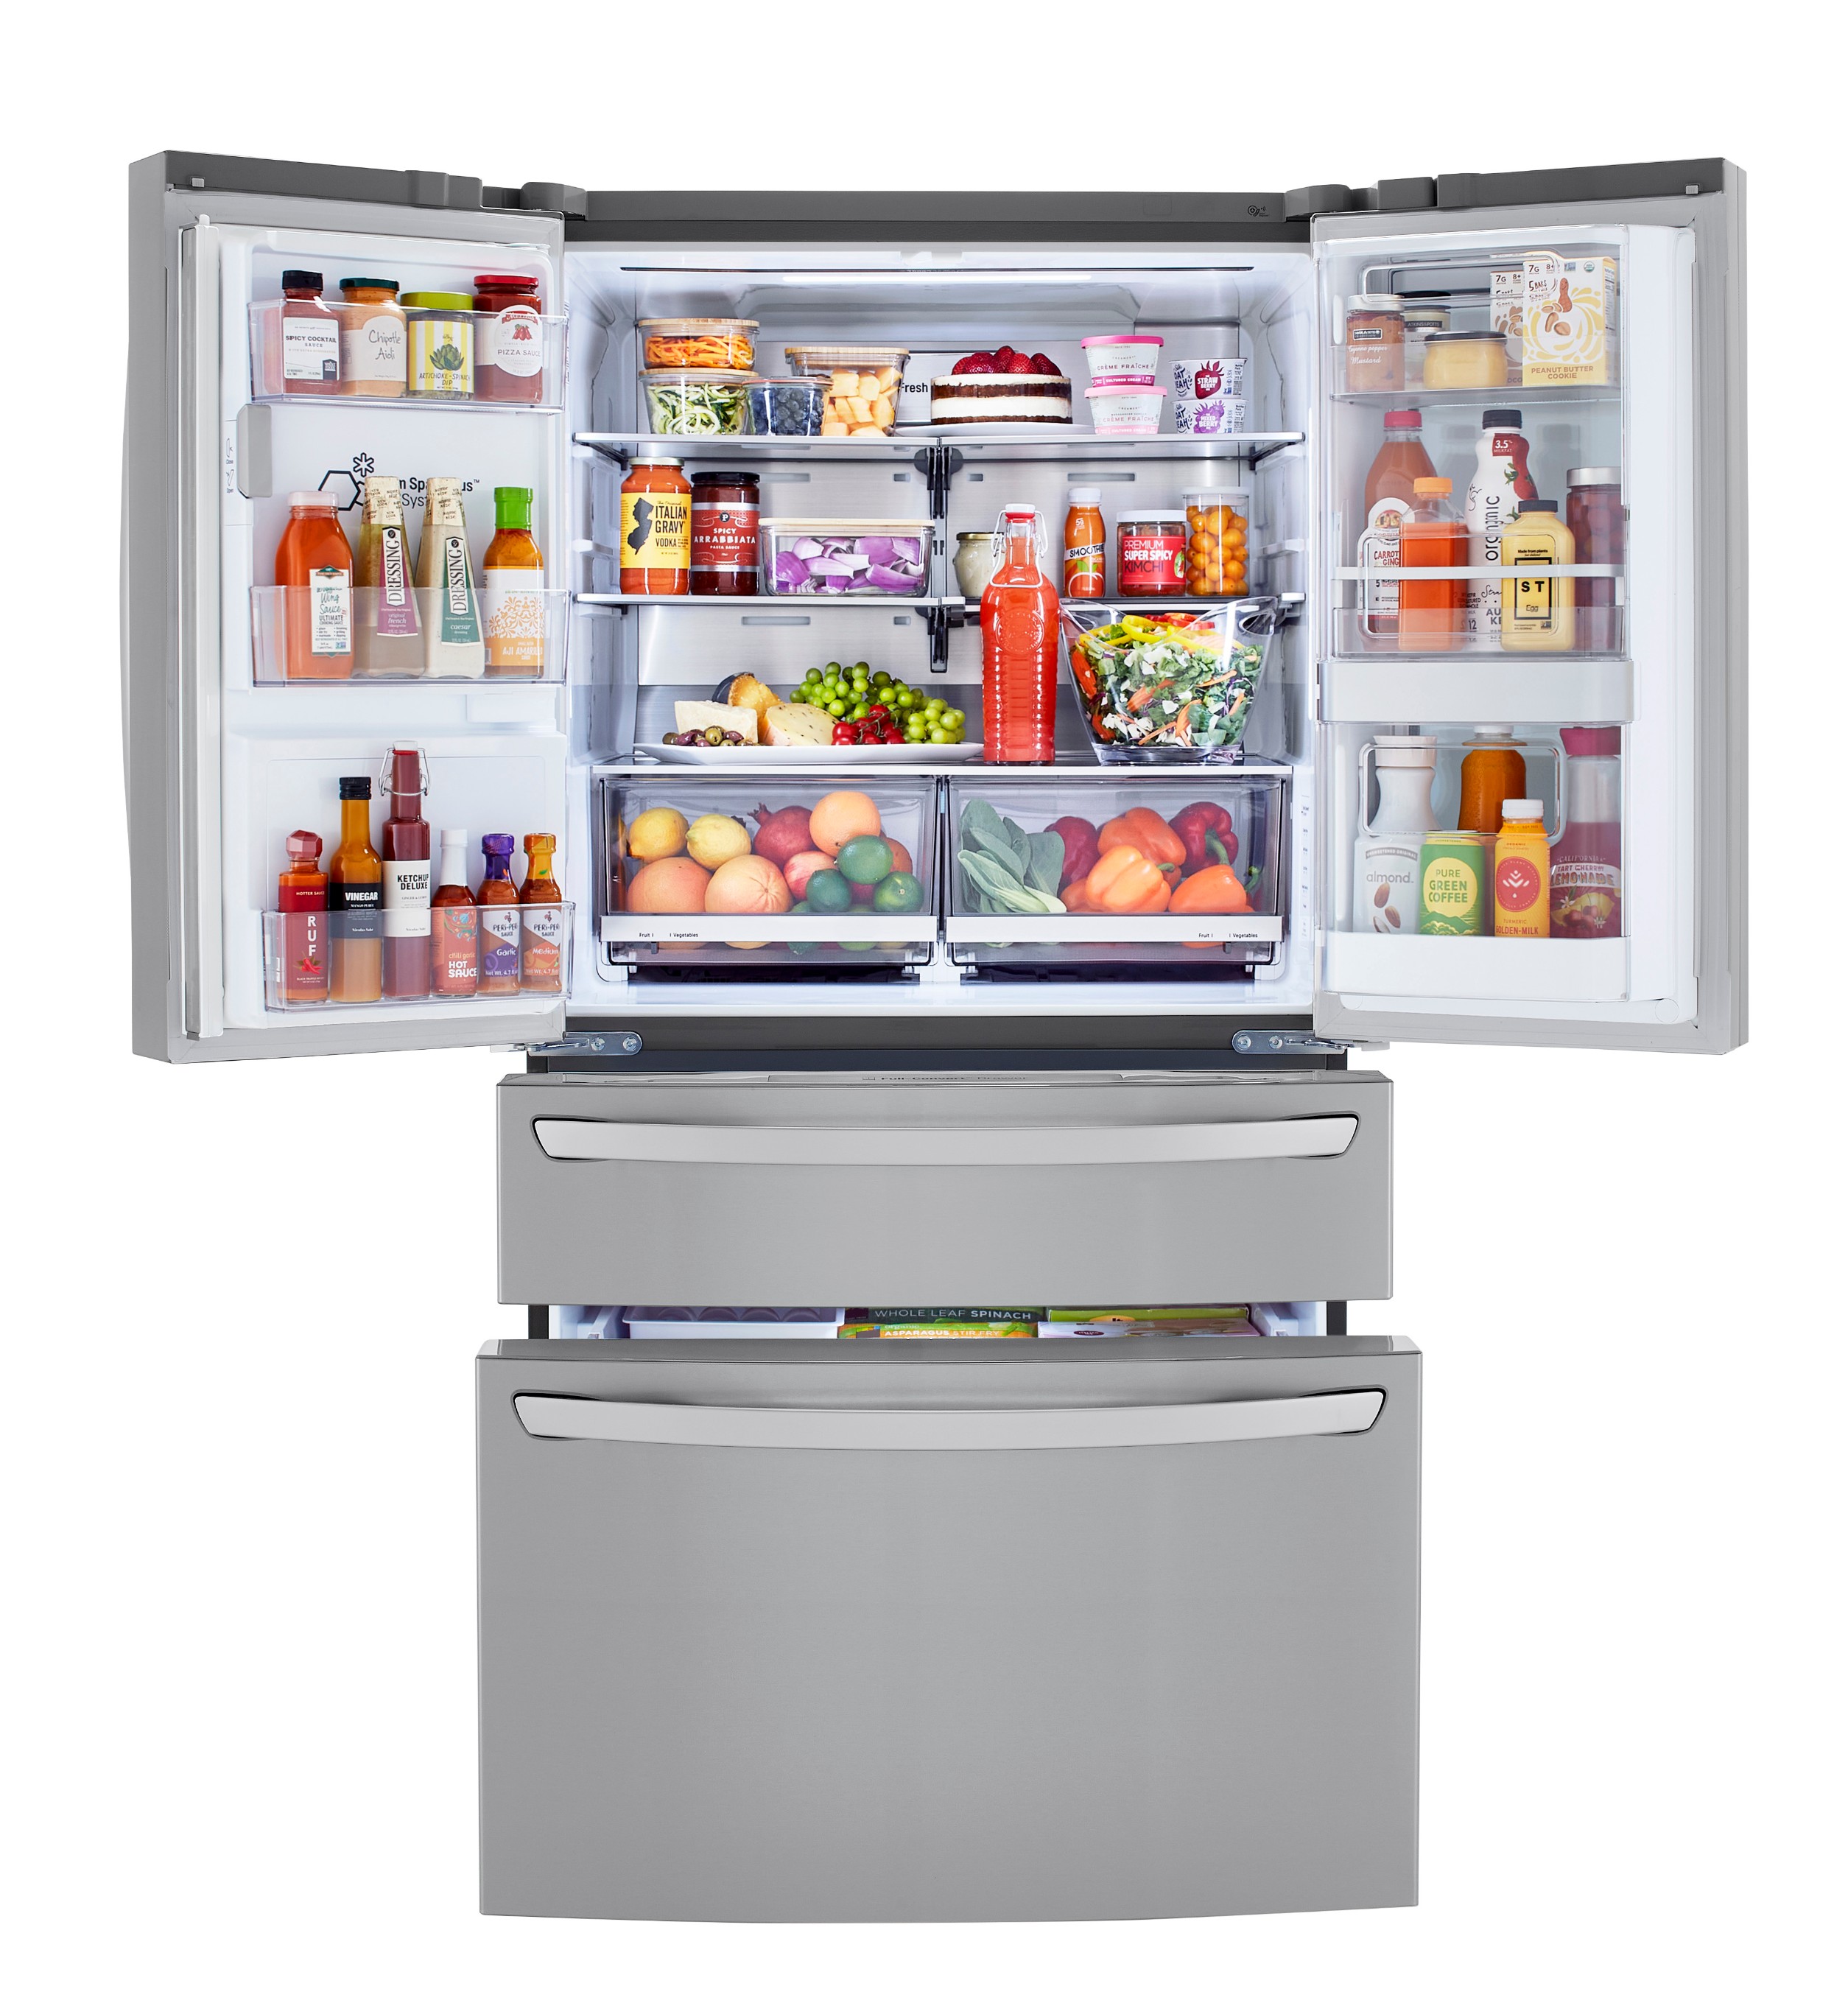 LG ‘Rolls’ Out Craft Ice On More Refrigerator Models, Adds New Features